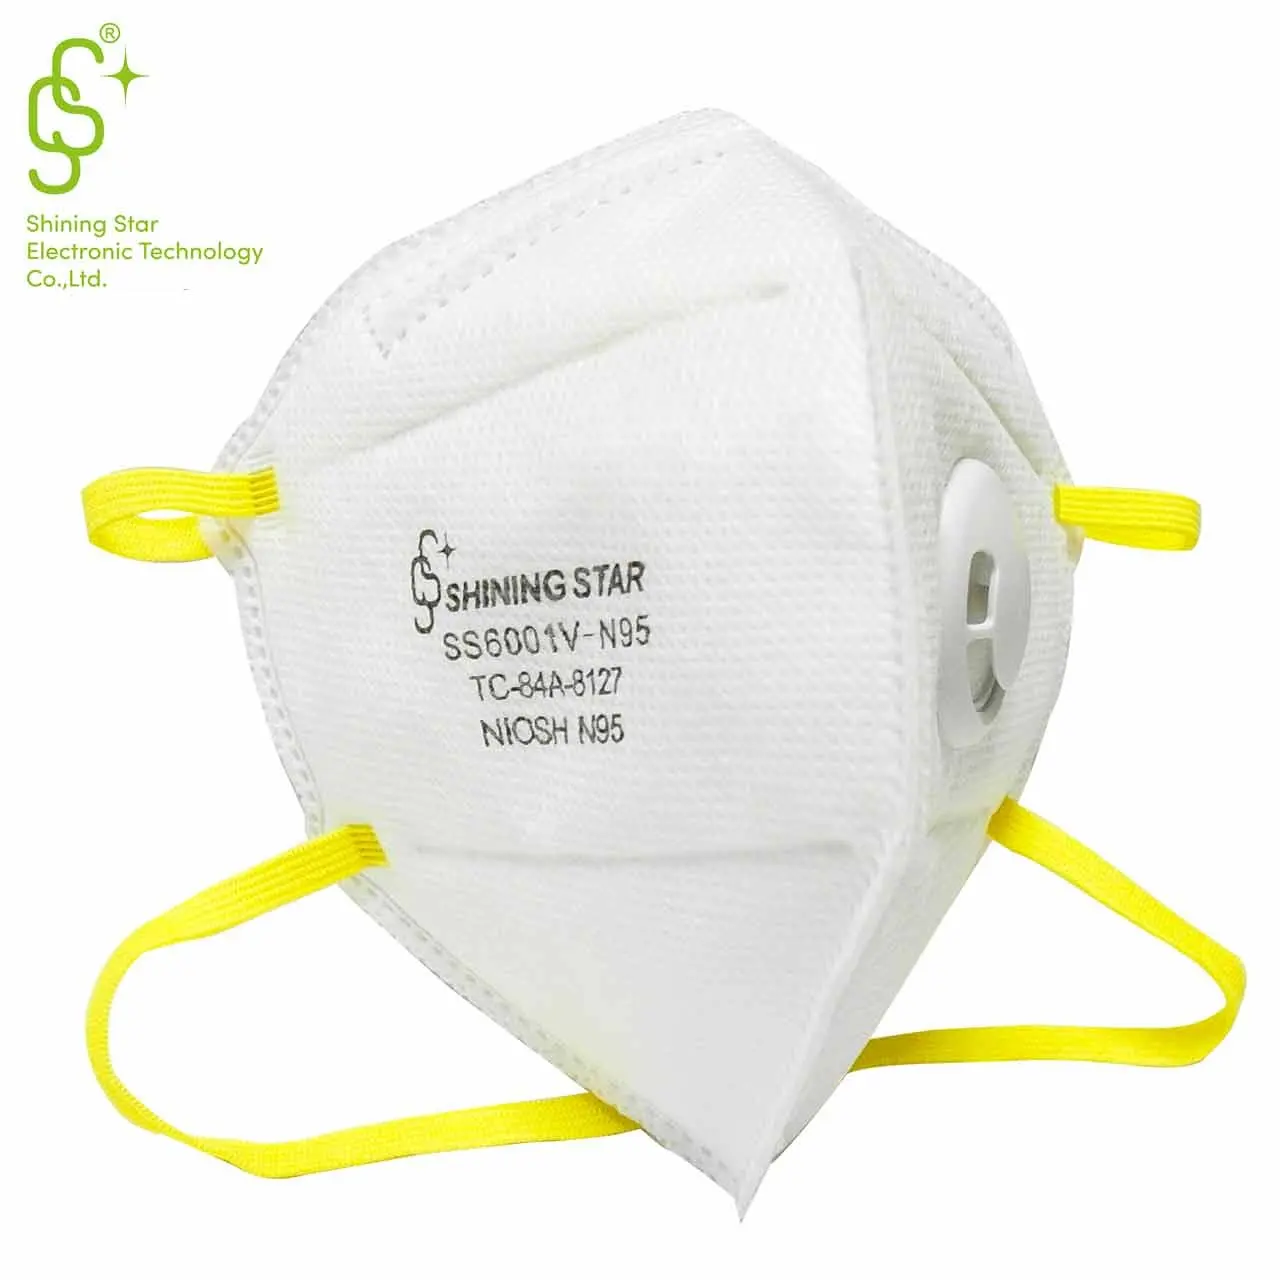 American Niosh Approved N95 Face Mask Foldable Dustproof Mask N95 Air Filter Mask With Valve